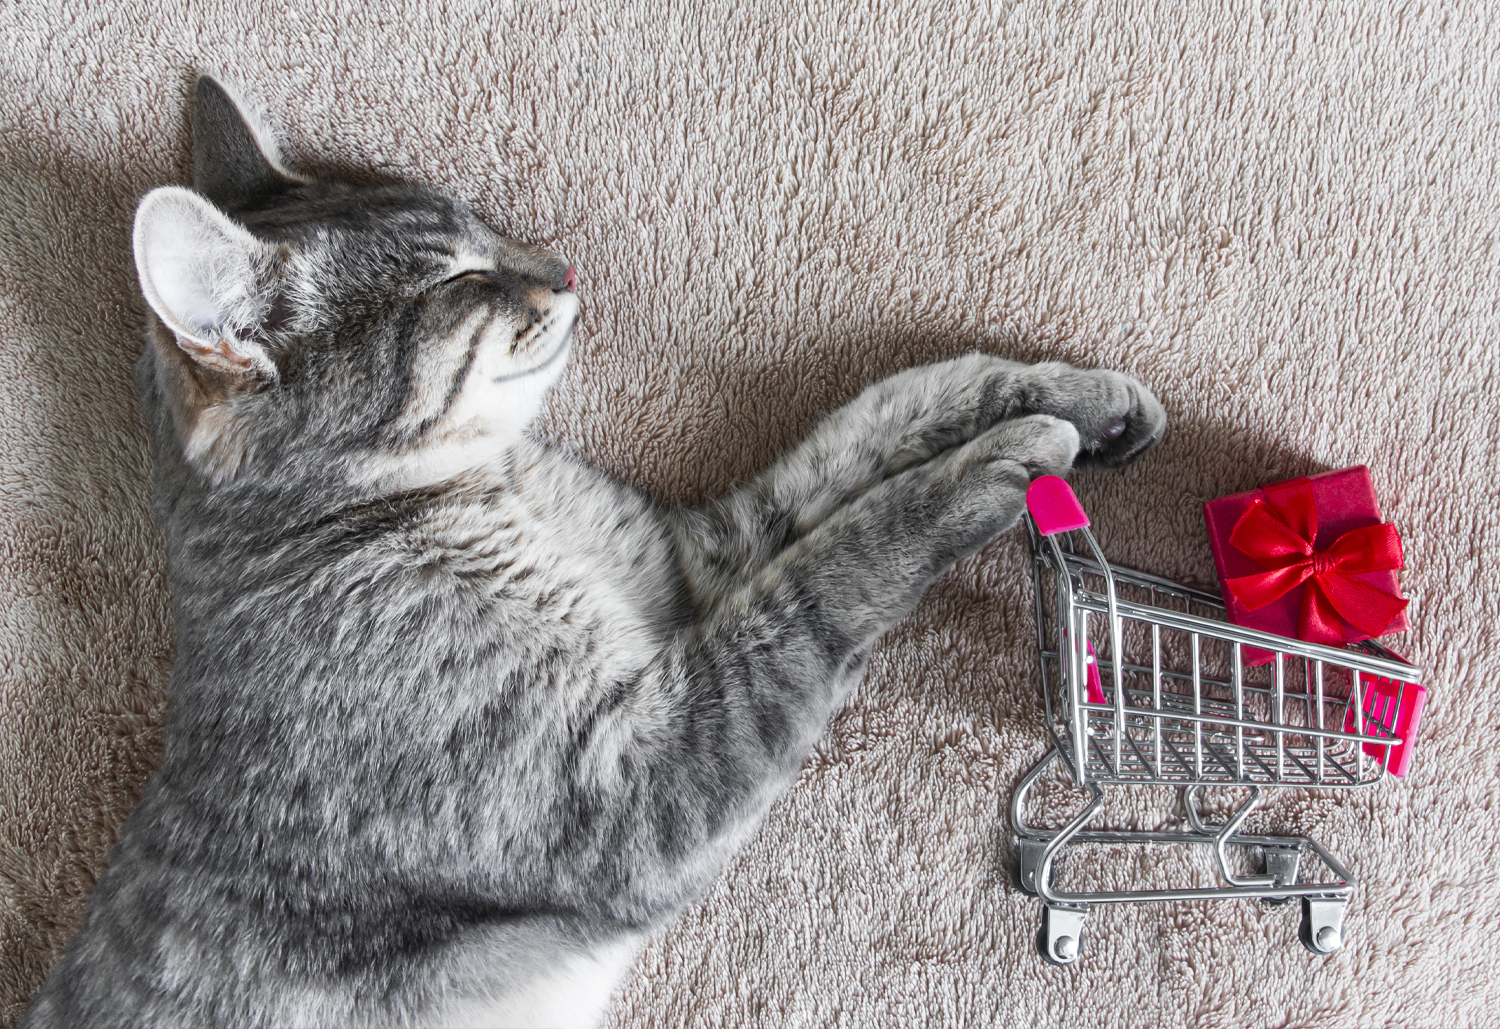 Cat With Shopping Cart - Why buying medication online is risky